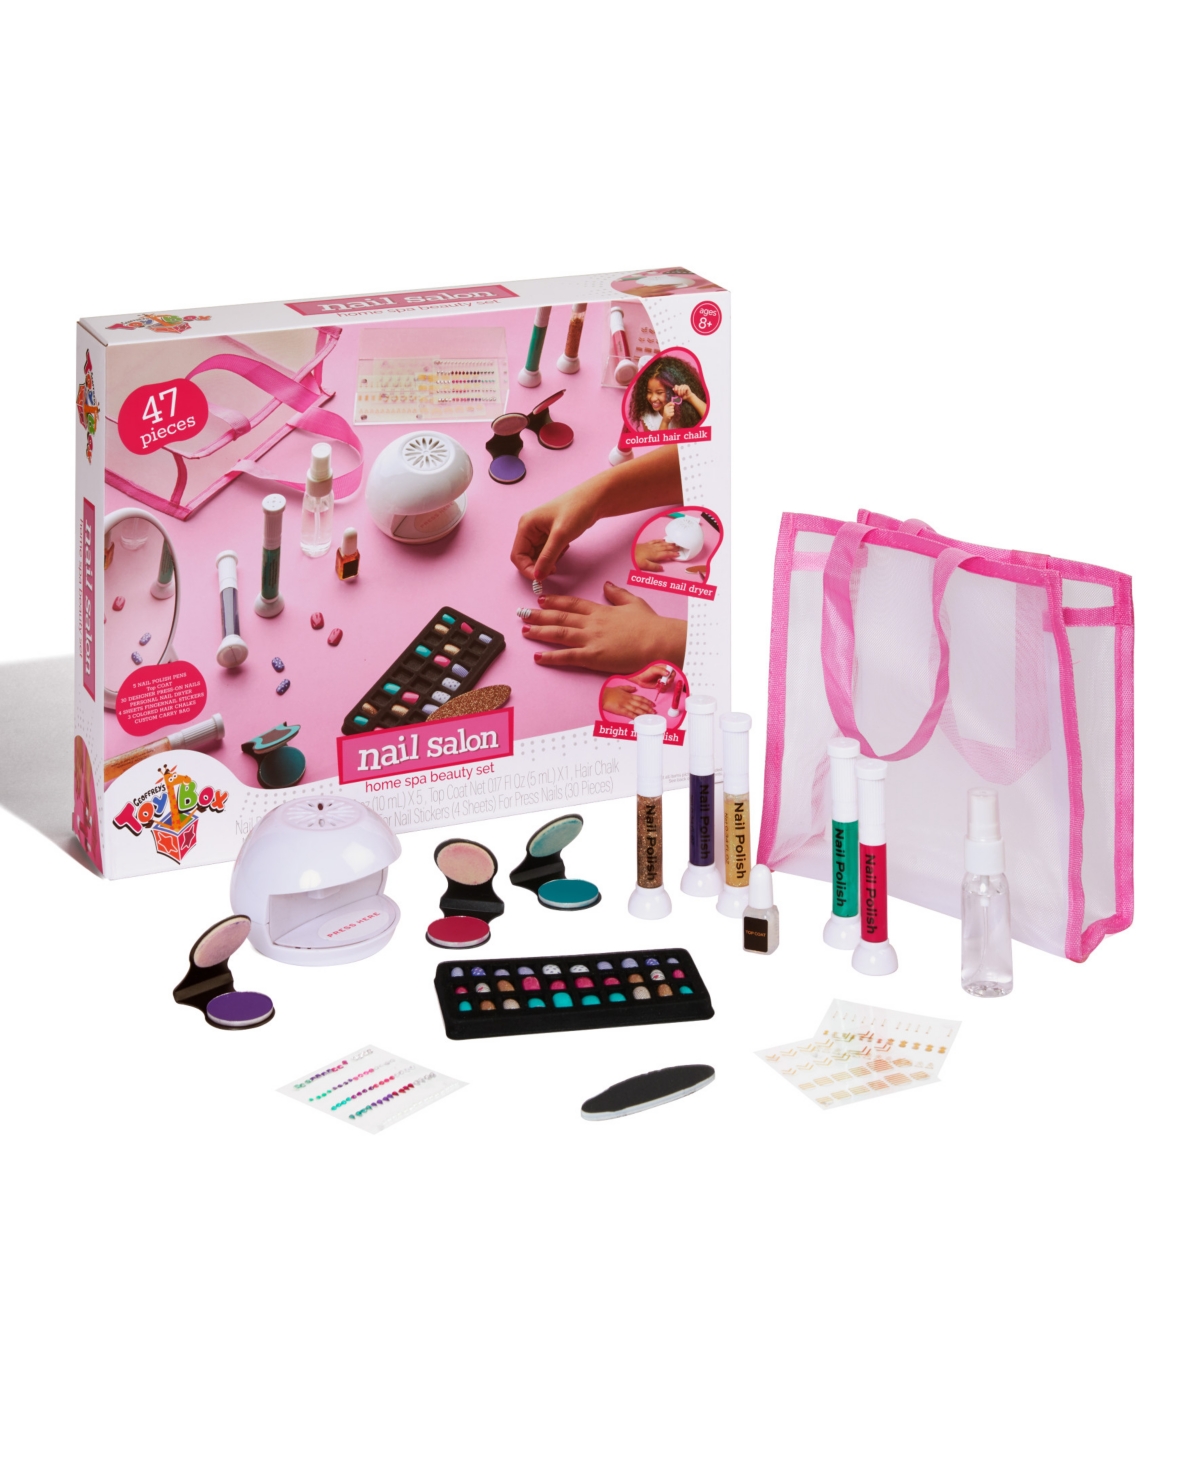 Pampered Play Day Spa Beauty Set, Created for Macy's - White